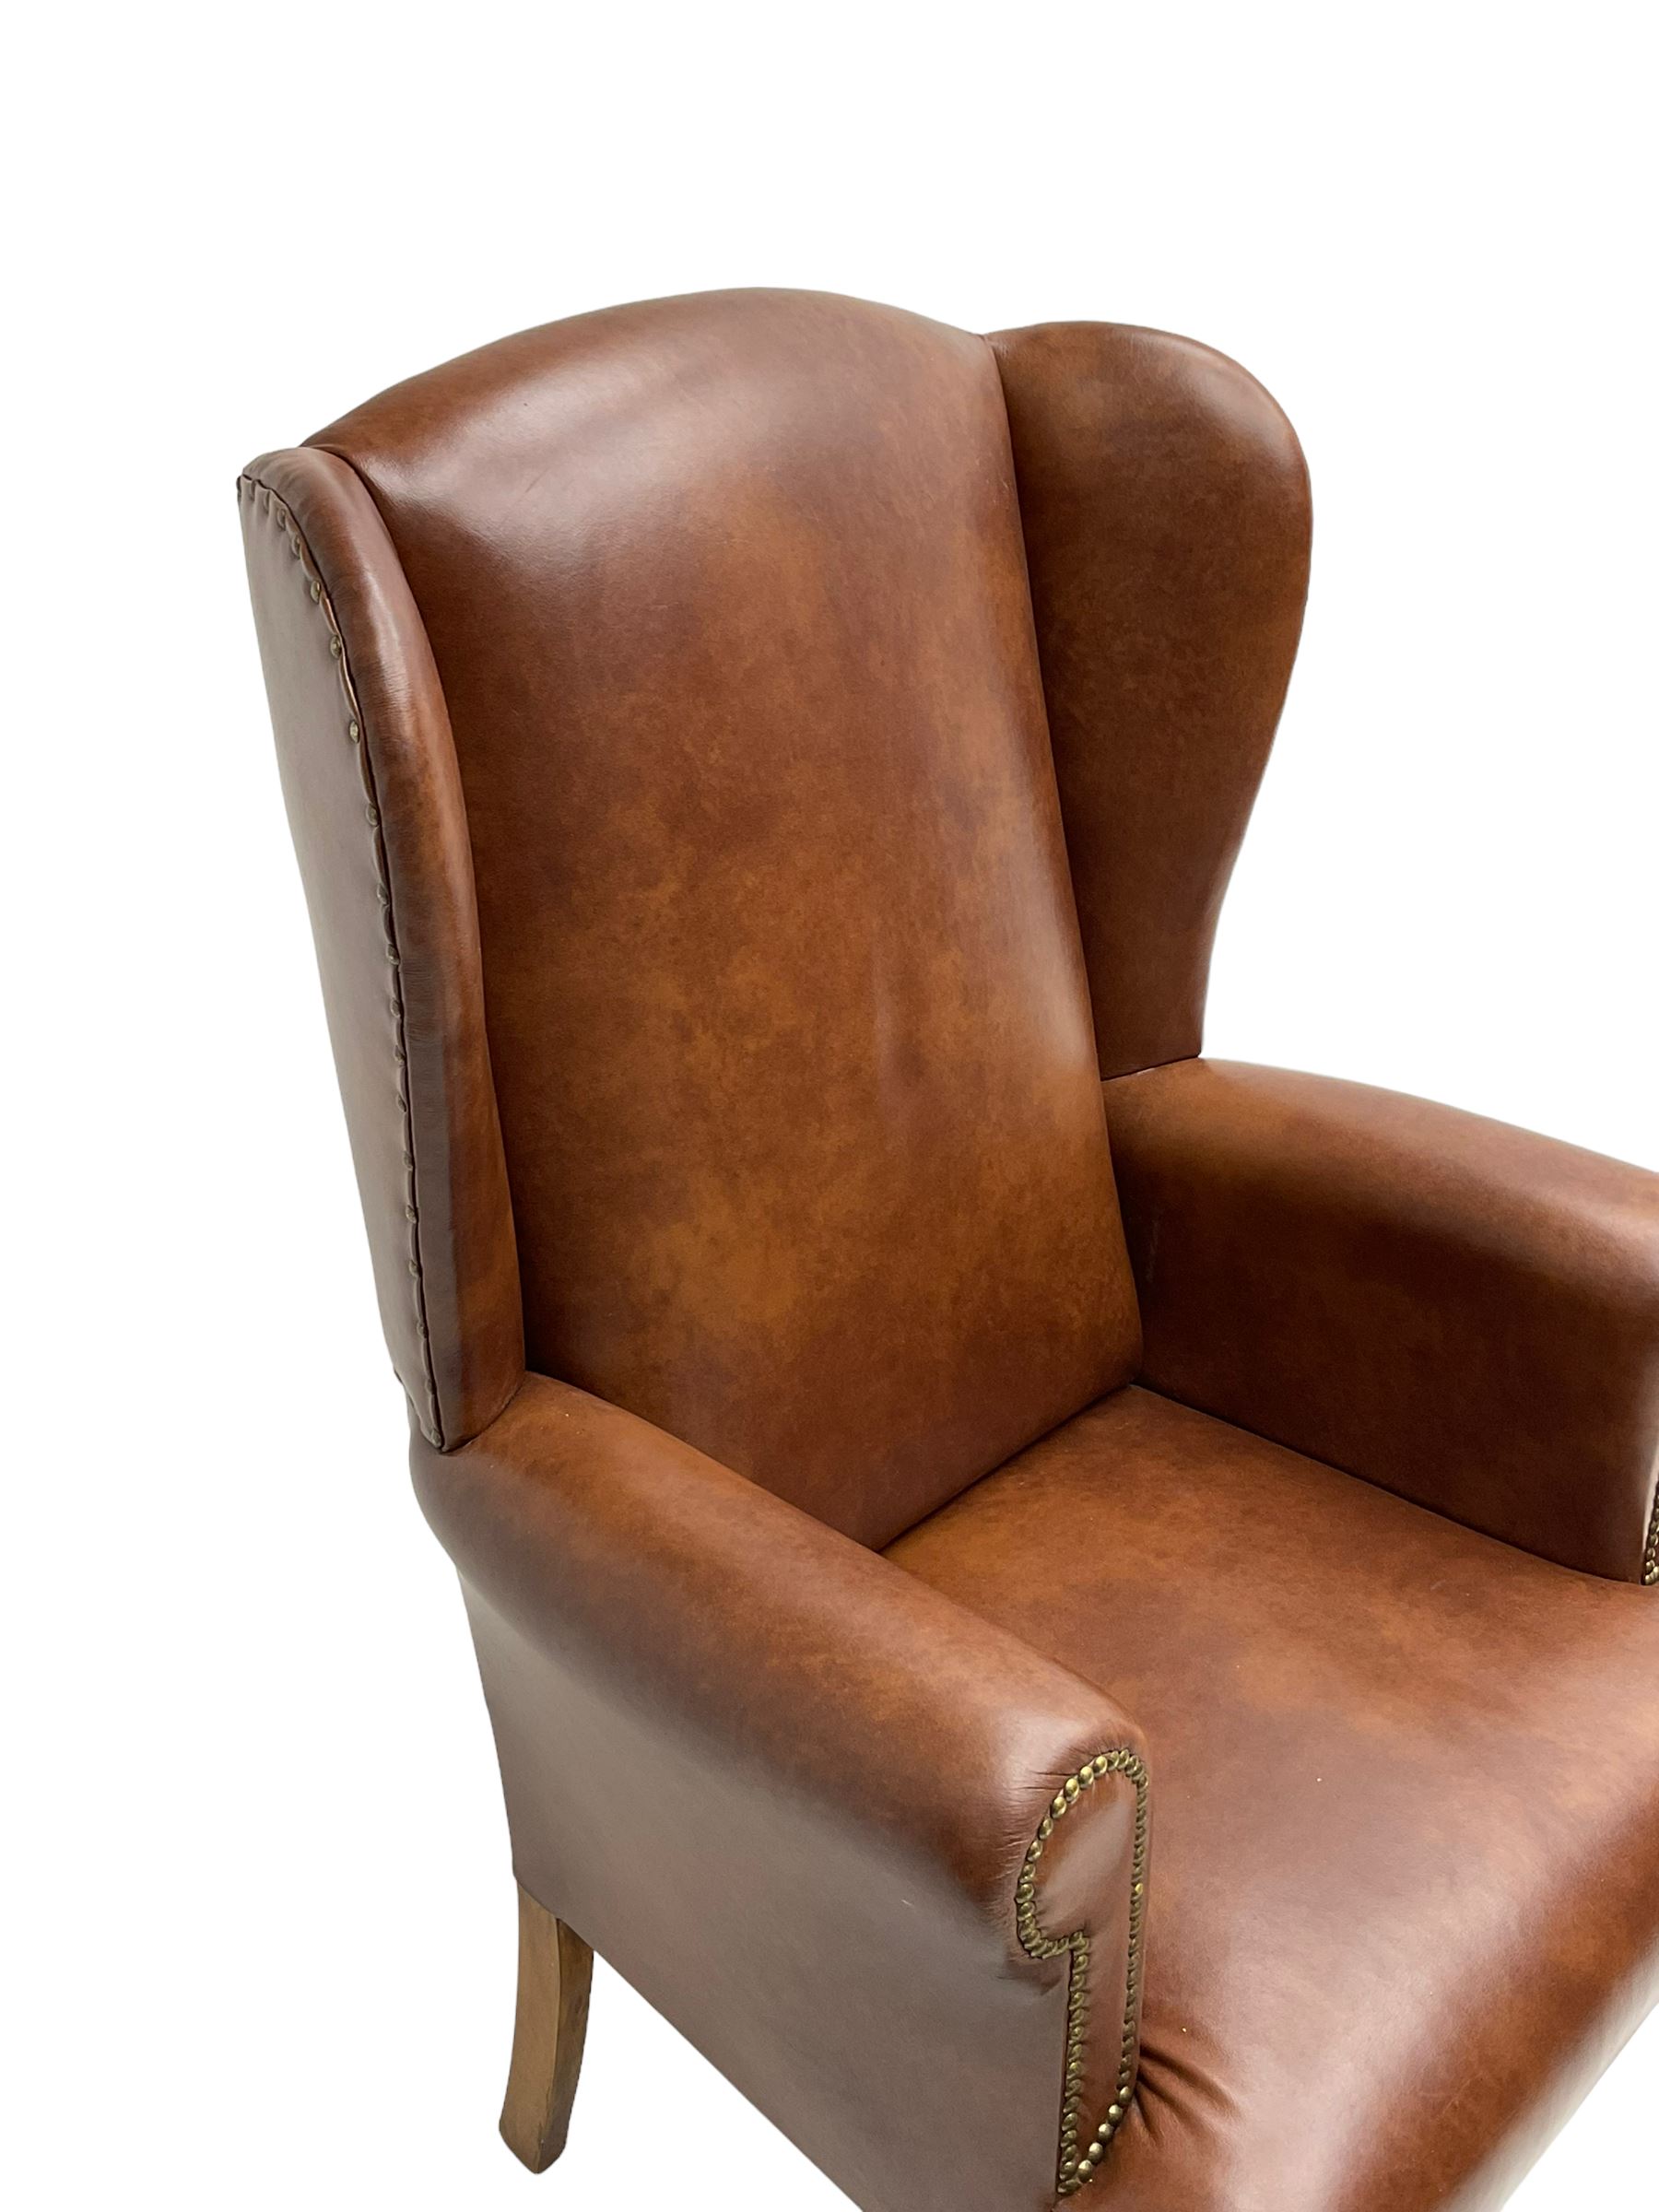 Beech framed wingback armchair - Image 5 of 5